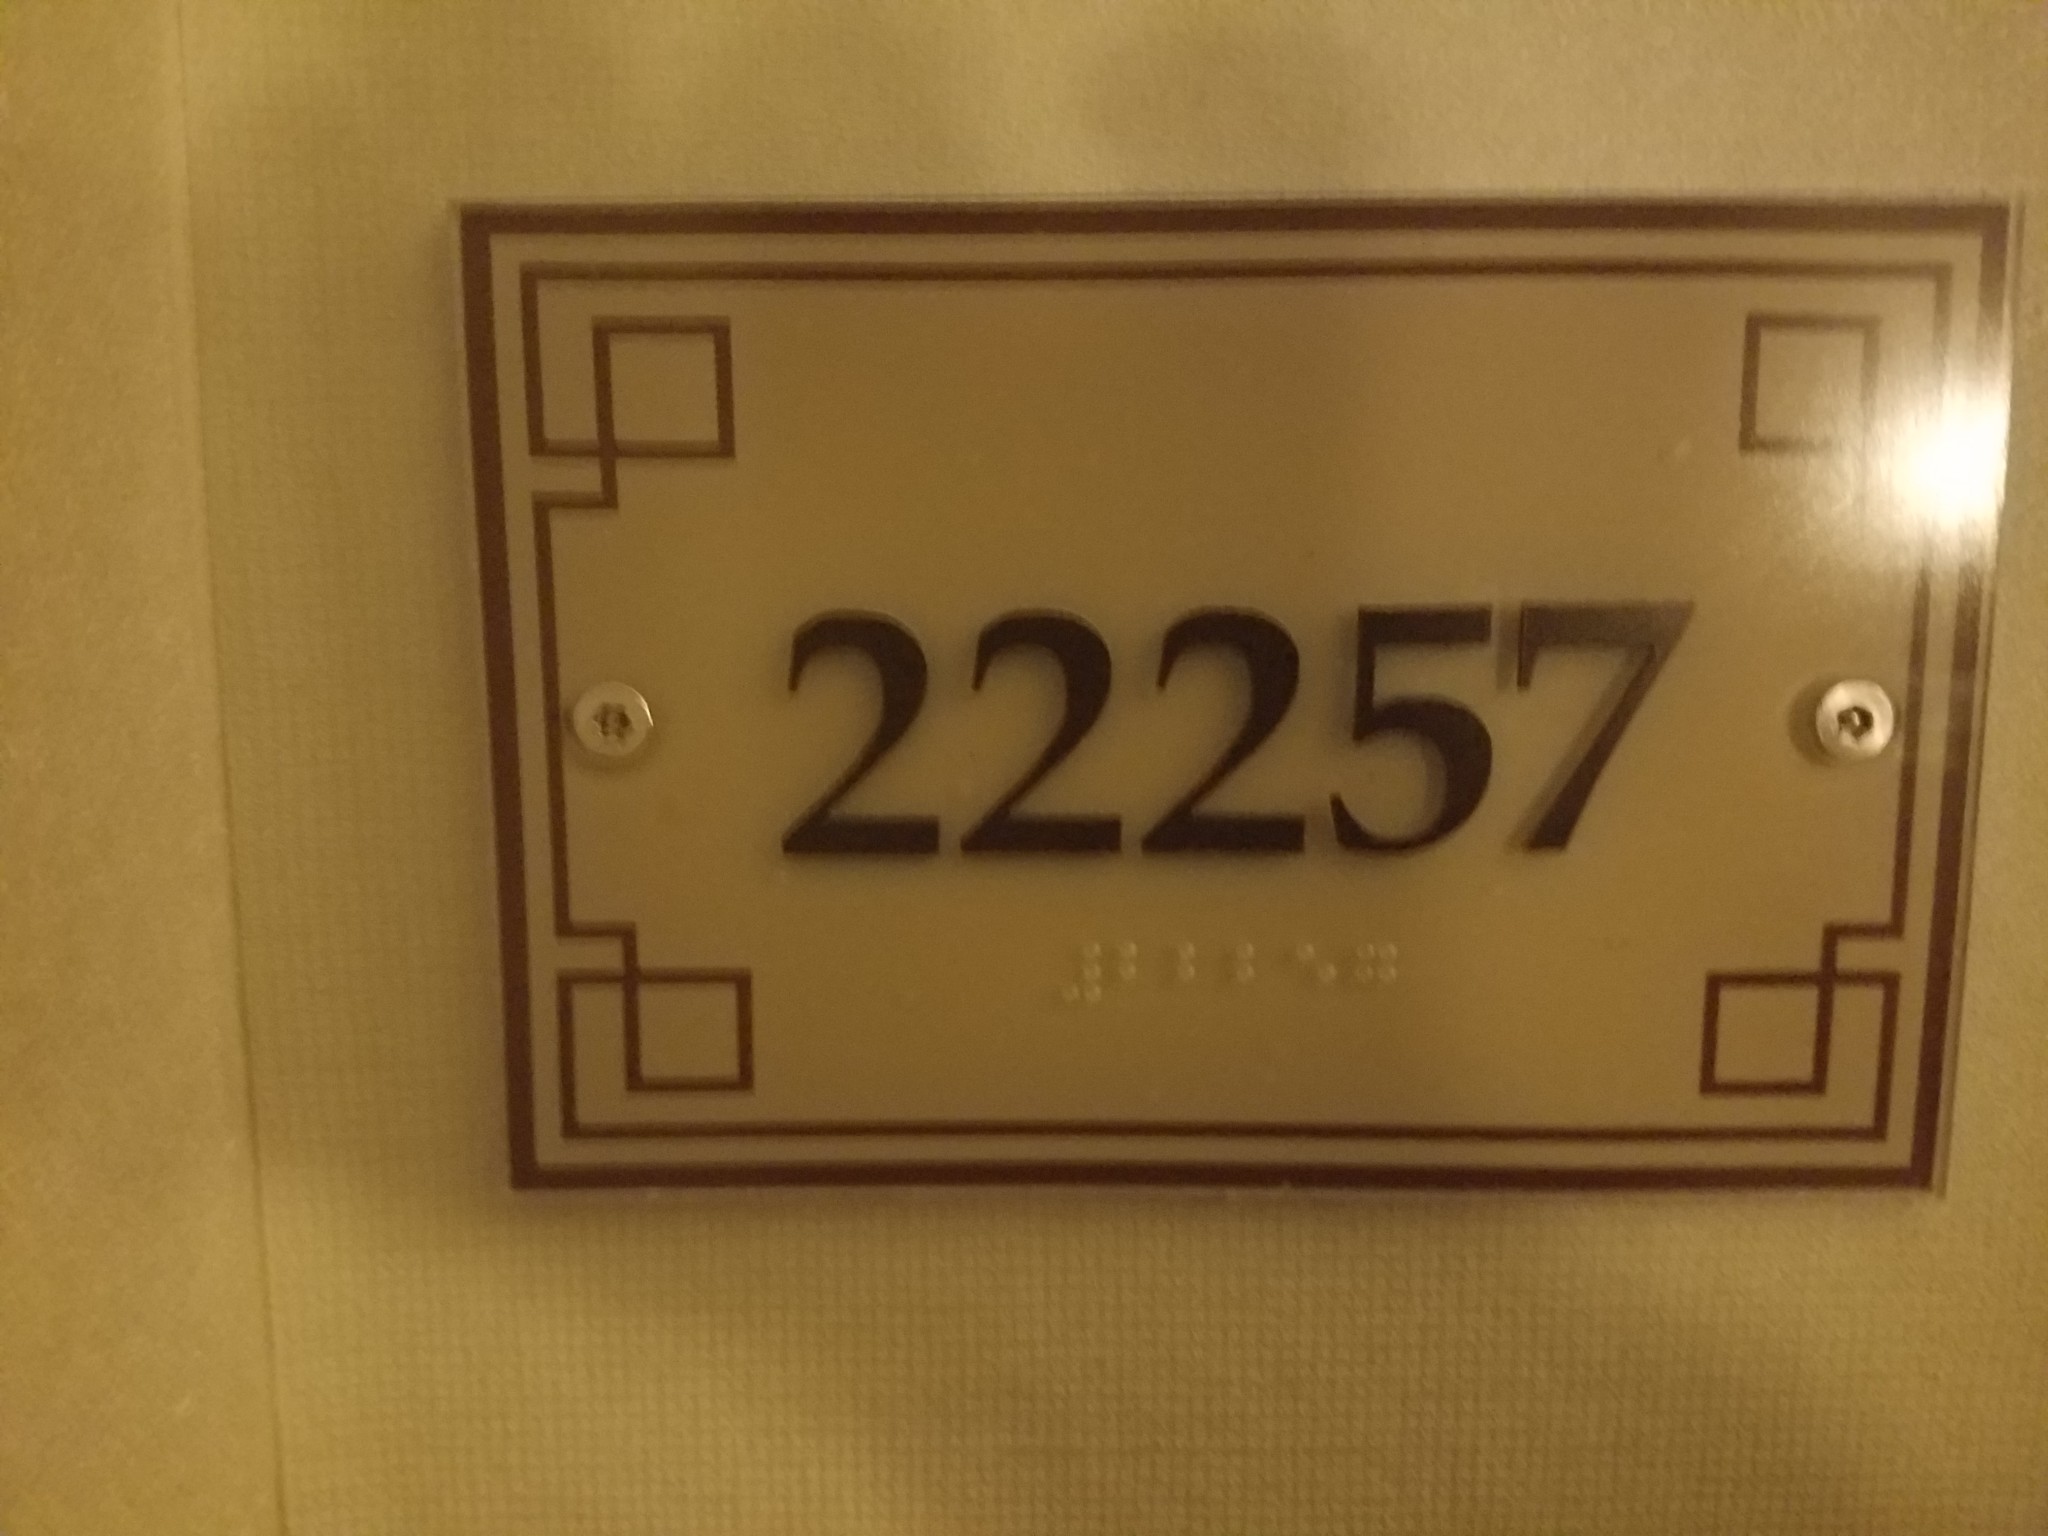 The most confusing room number for simpletons like myself to remember